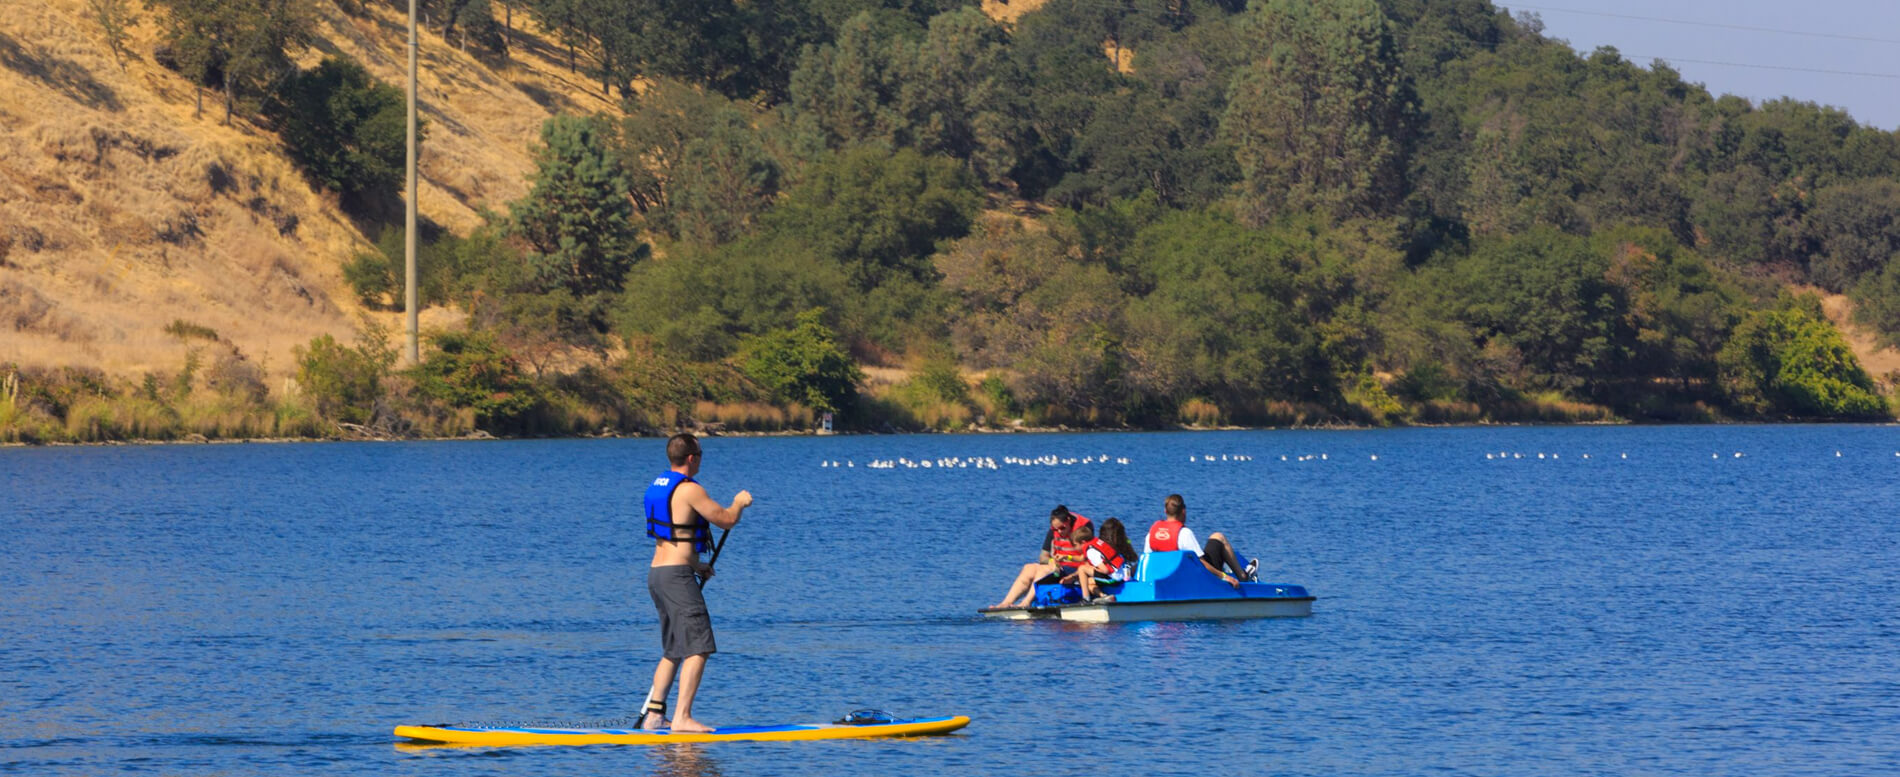 Man paddle boarding in the lake